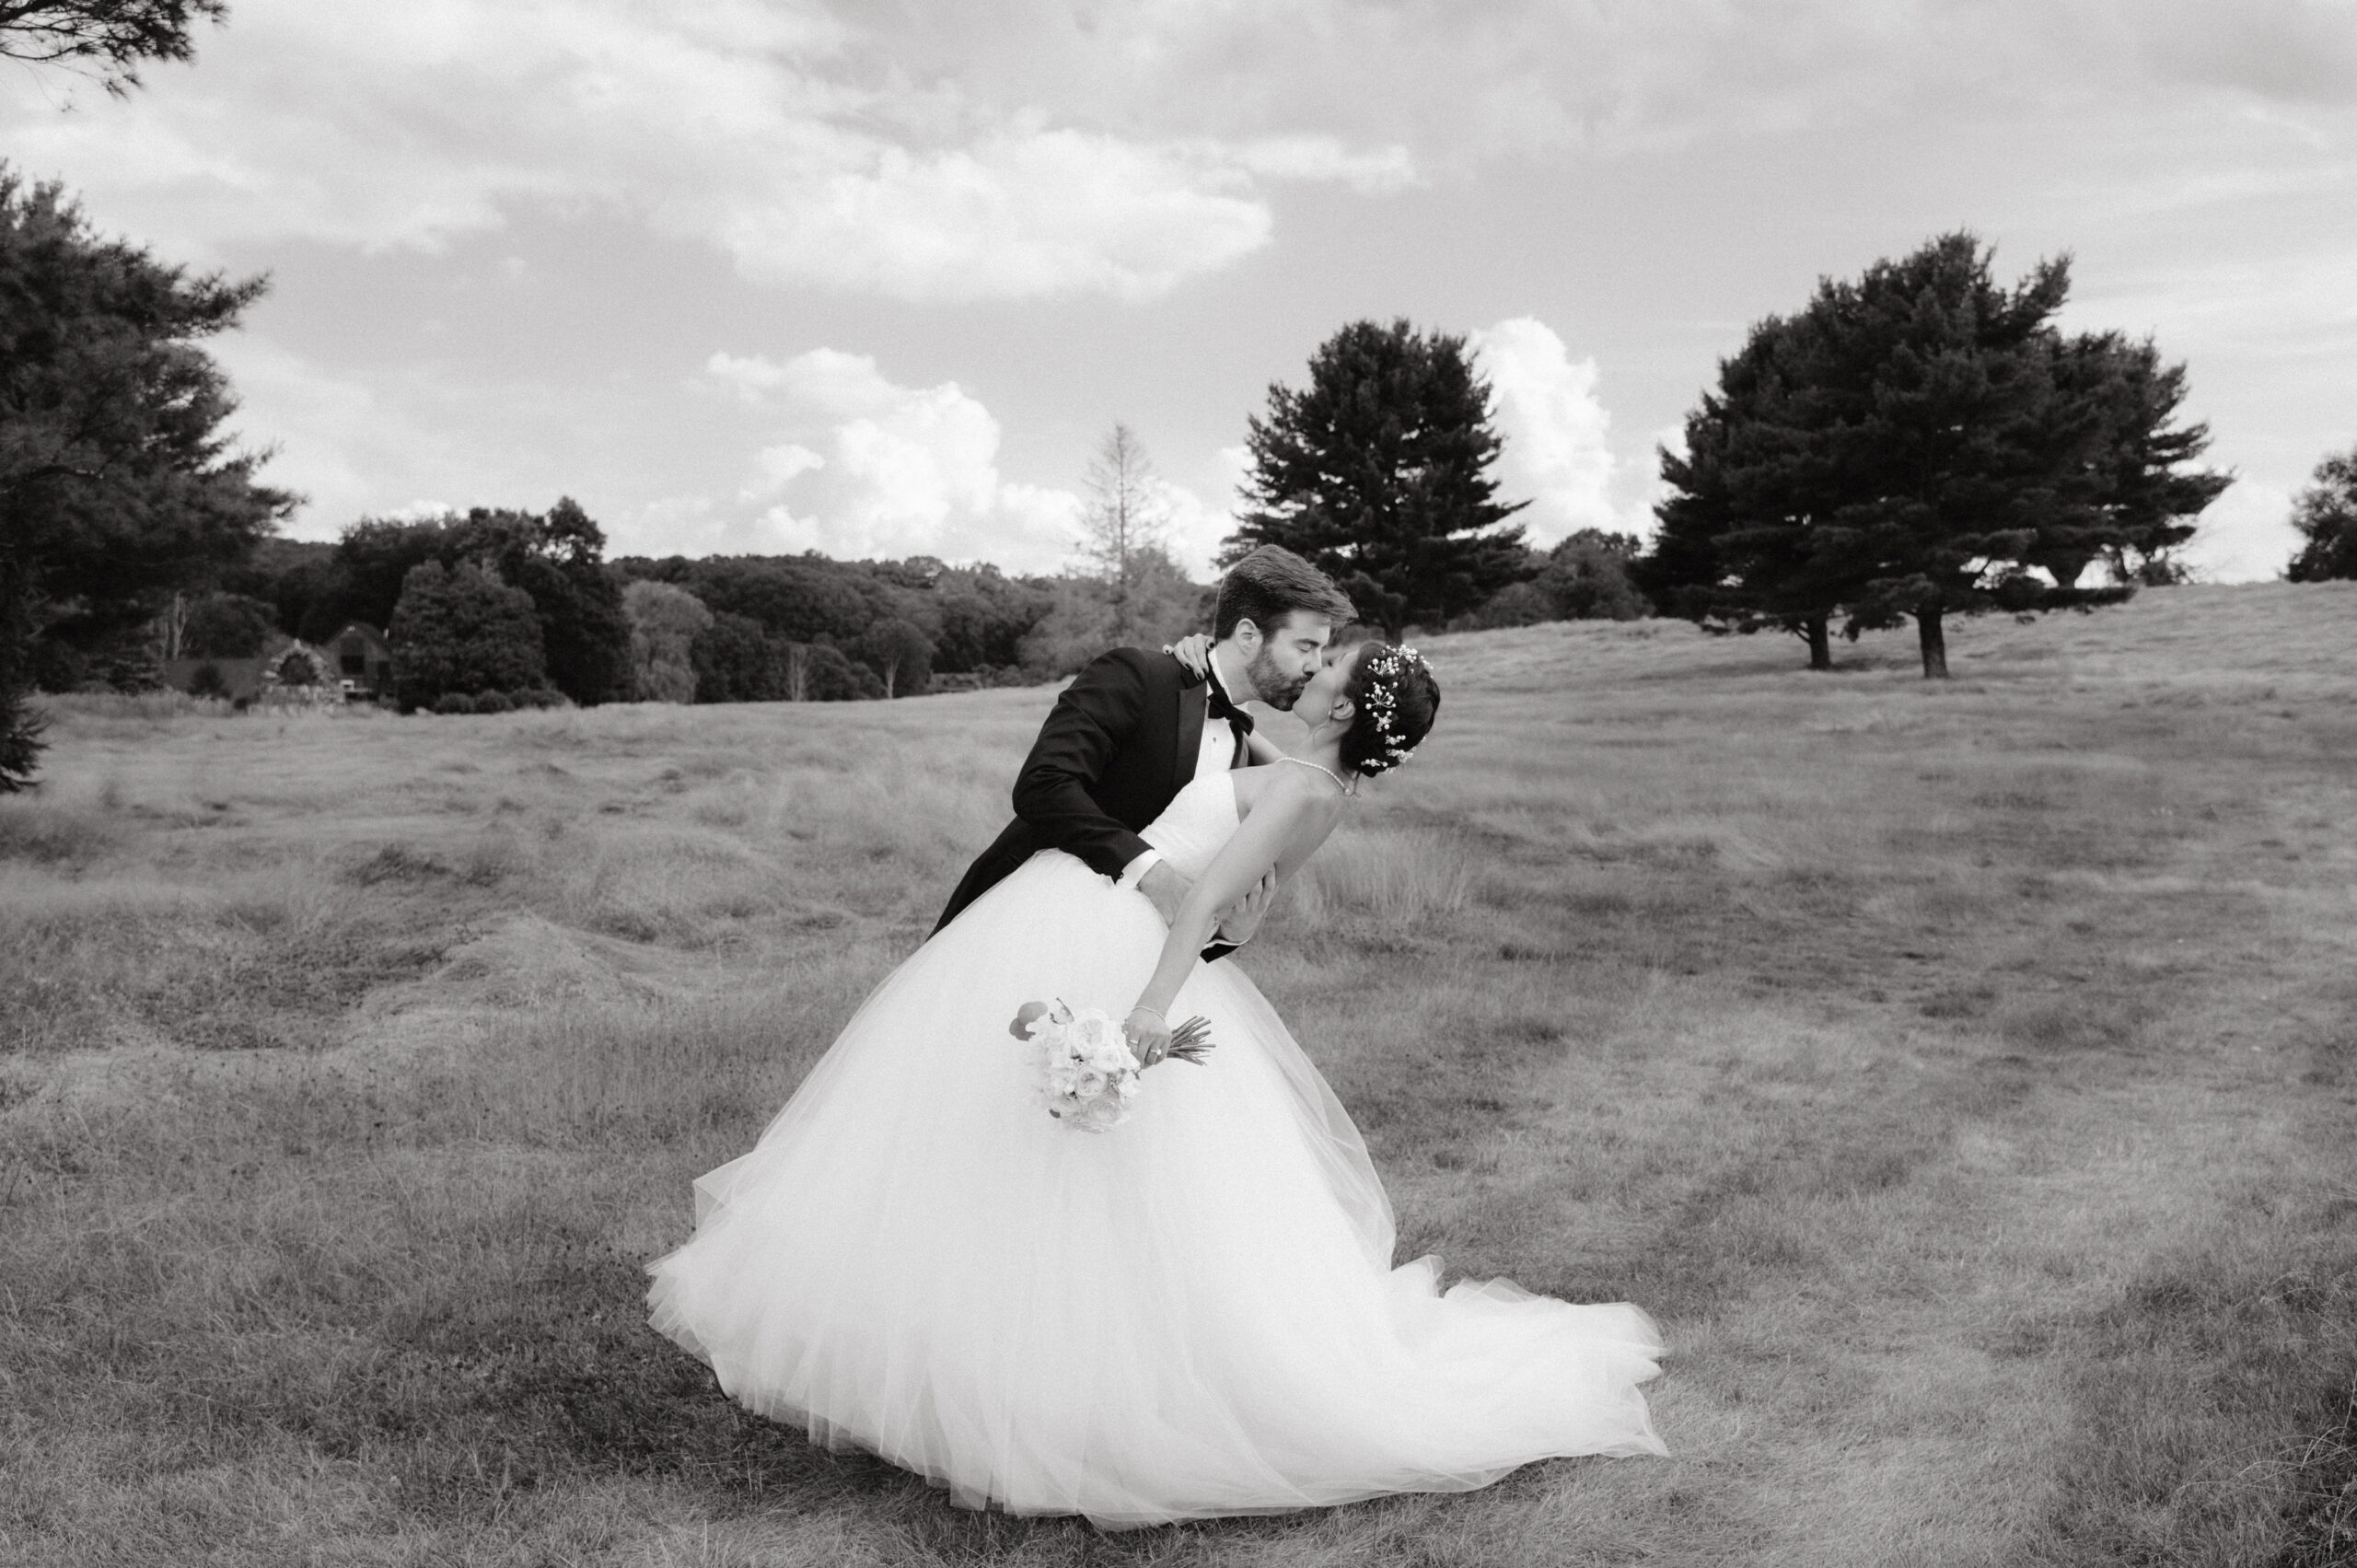 The groom is kissing the bride outdoors. Black and white wedding photography image by Jenny Fu Studio